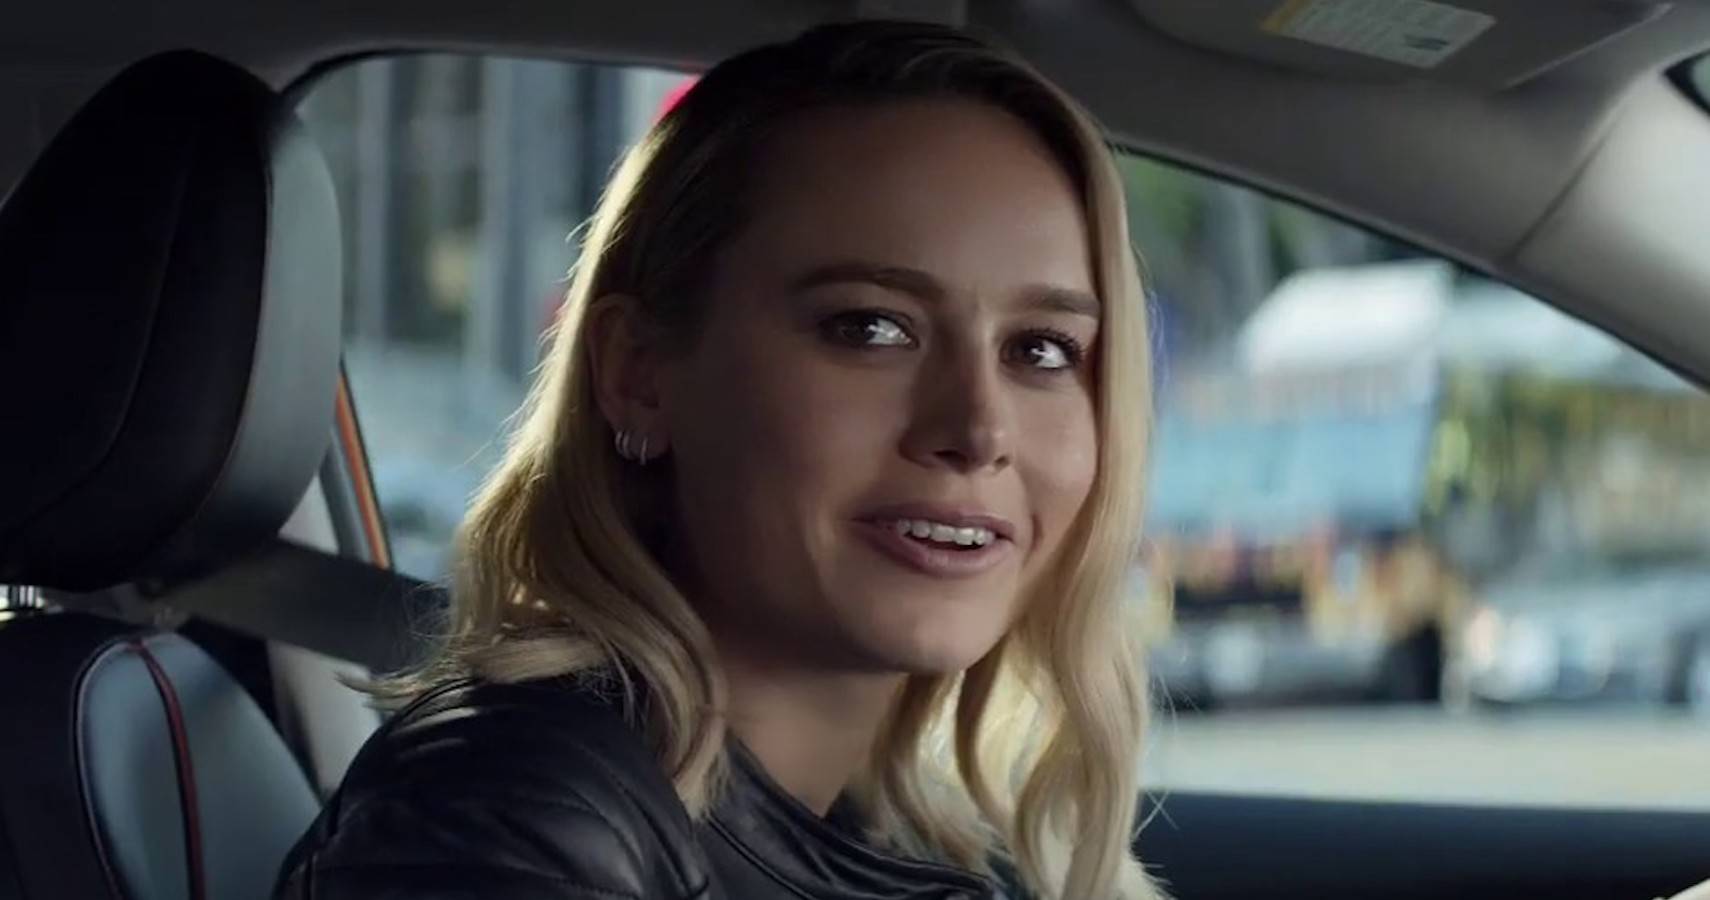 Blonde in nissan commercial